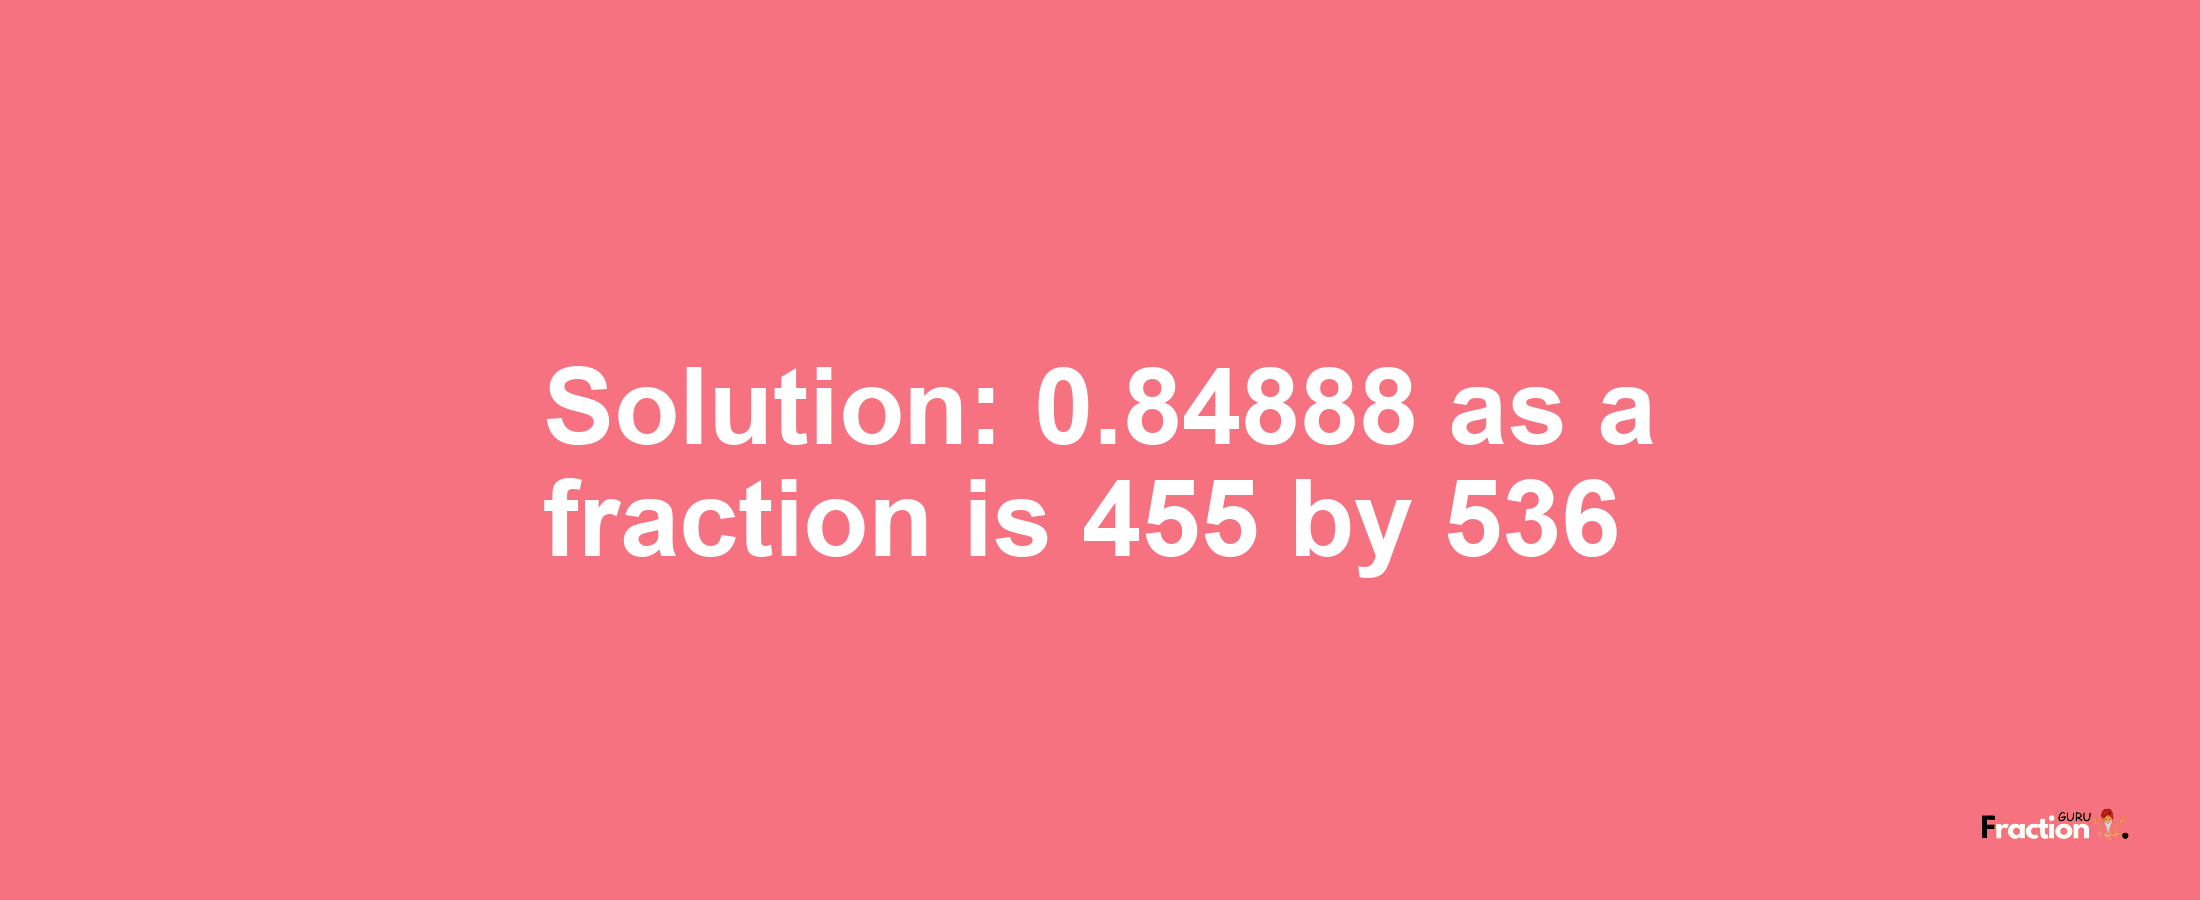 Solution:0.84888 as a fraction is 455/536